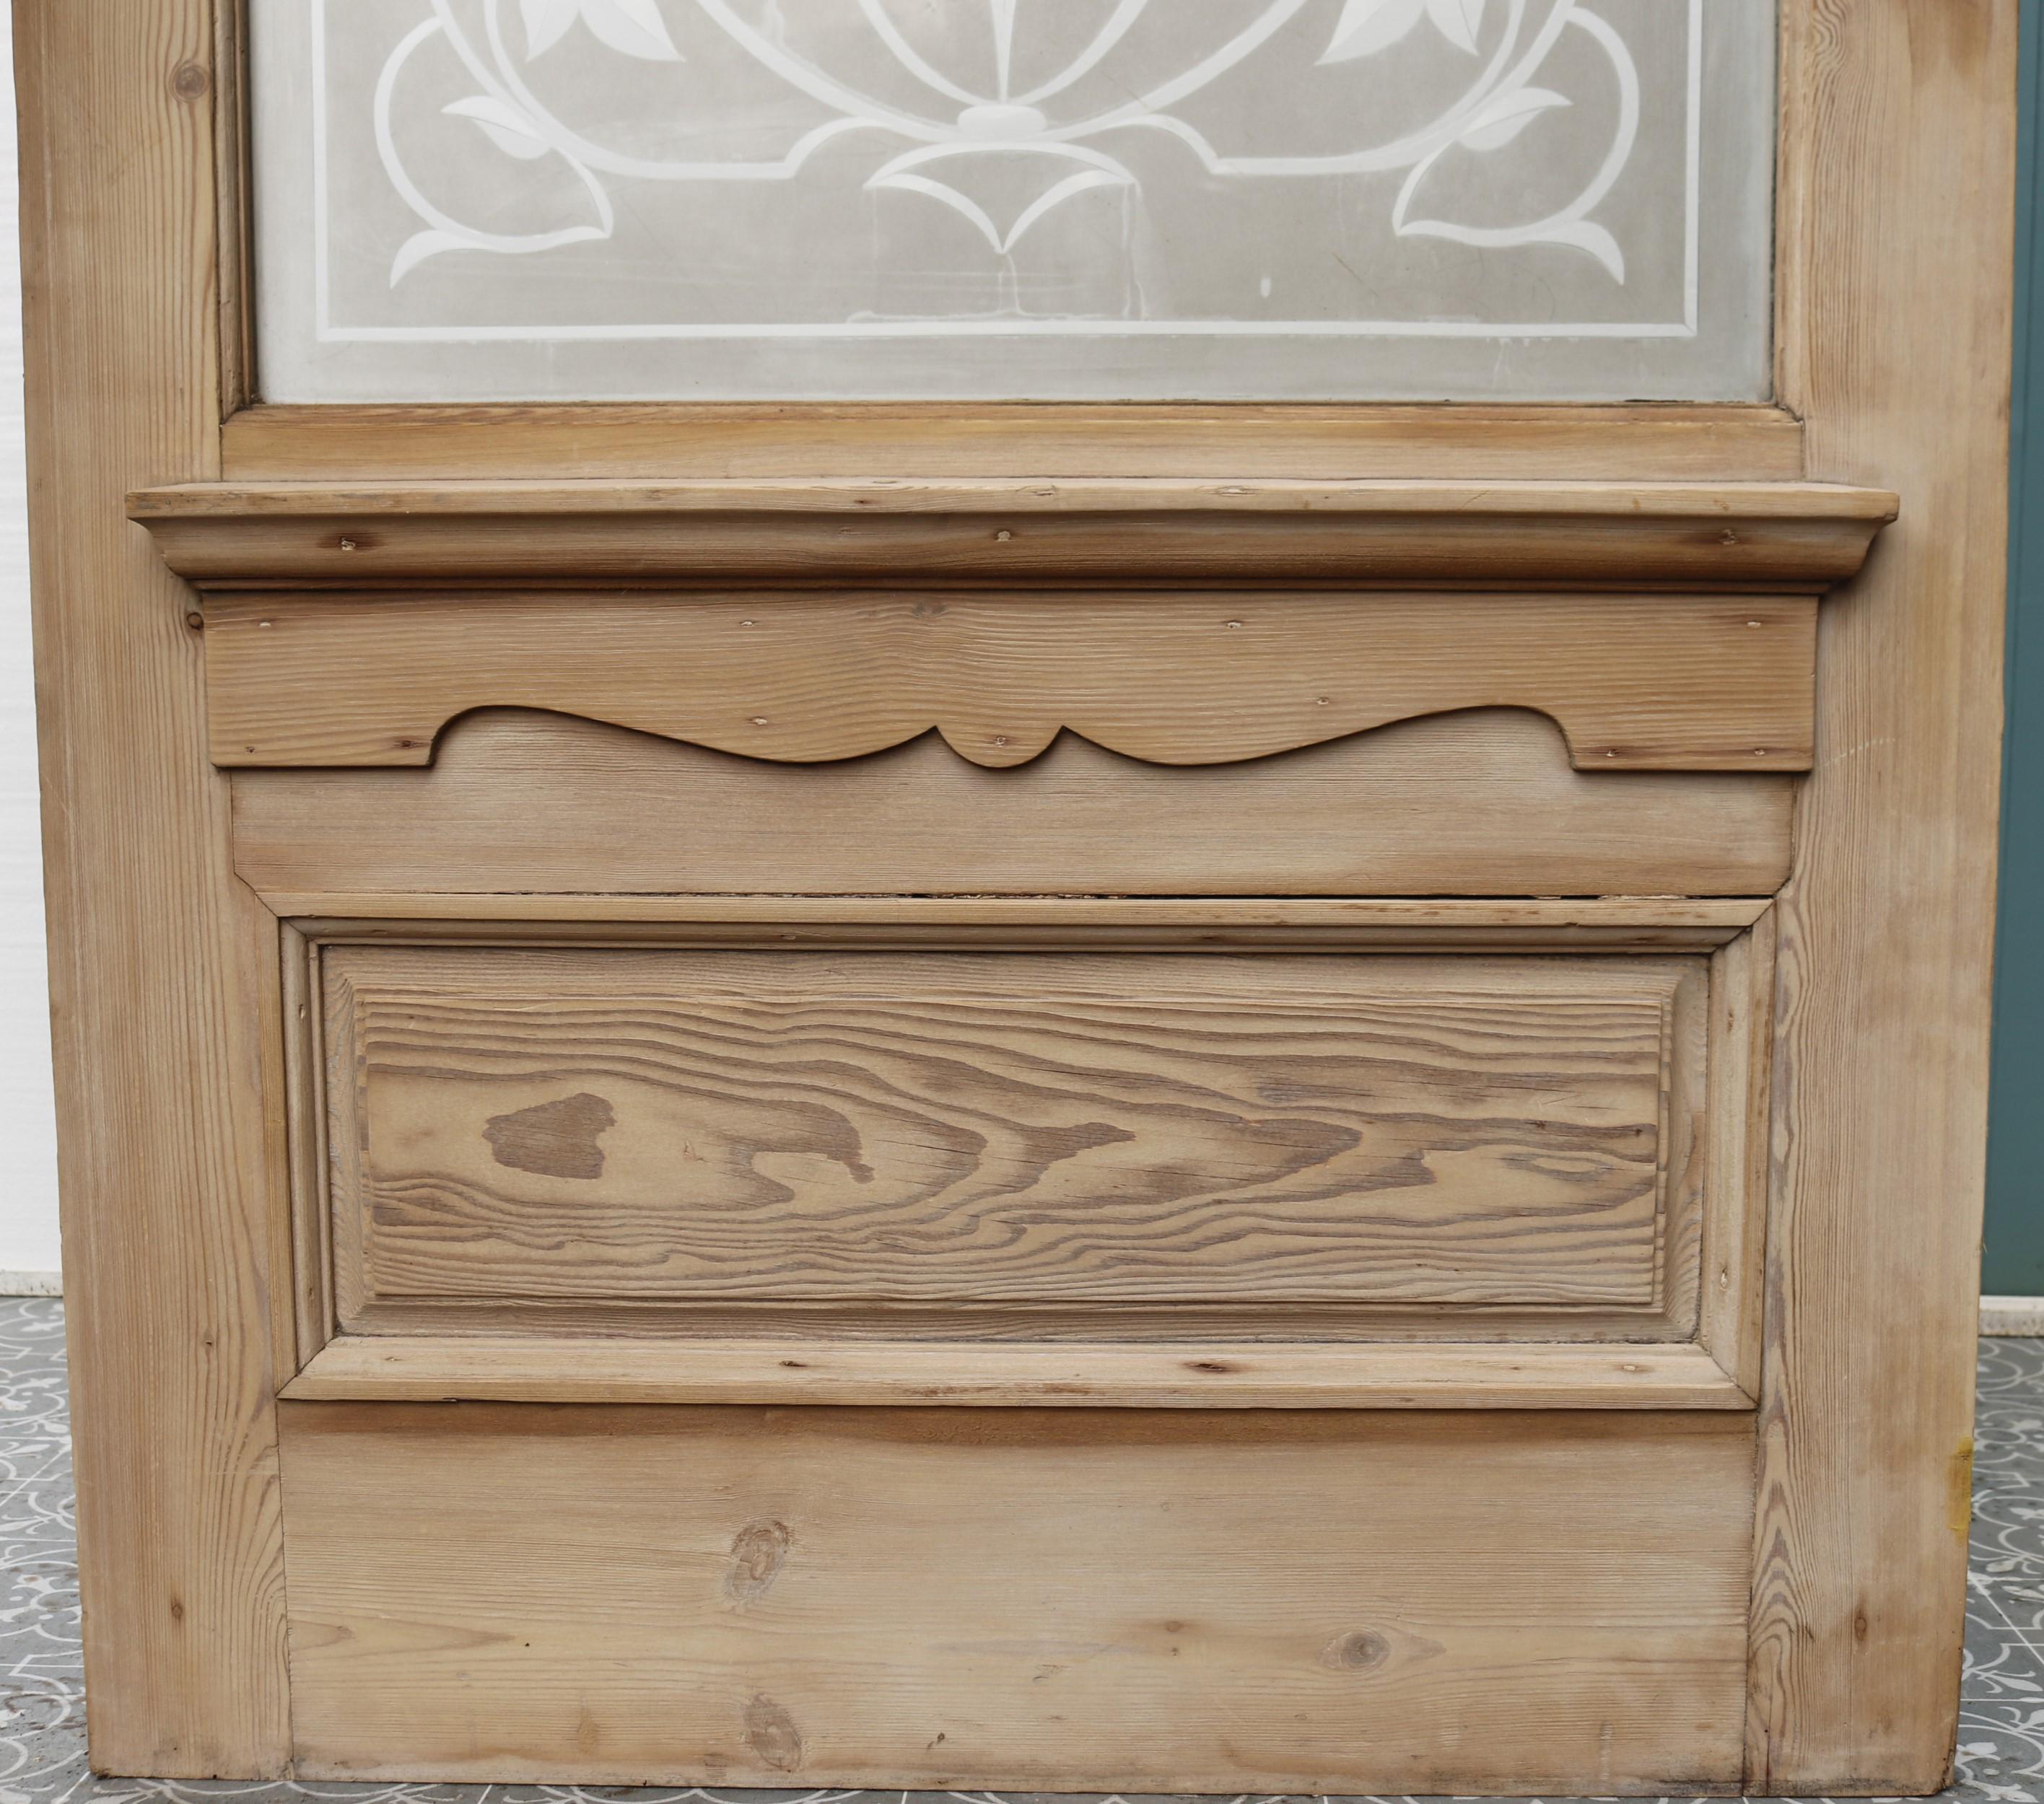 A salvaged pine front door with complete etched glass panel and a sanded finish ready for waxing or painting.

This is suitable for use as a front door or internally.